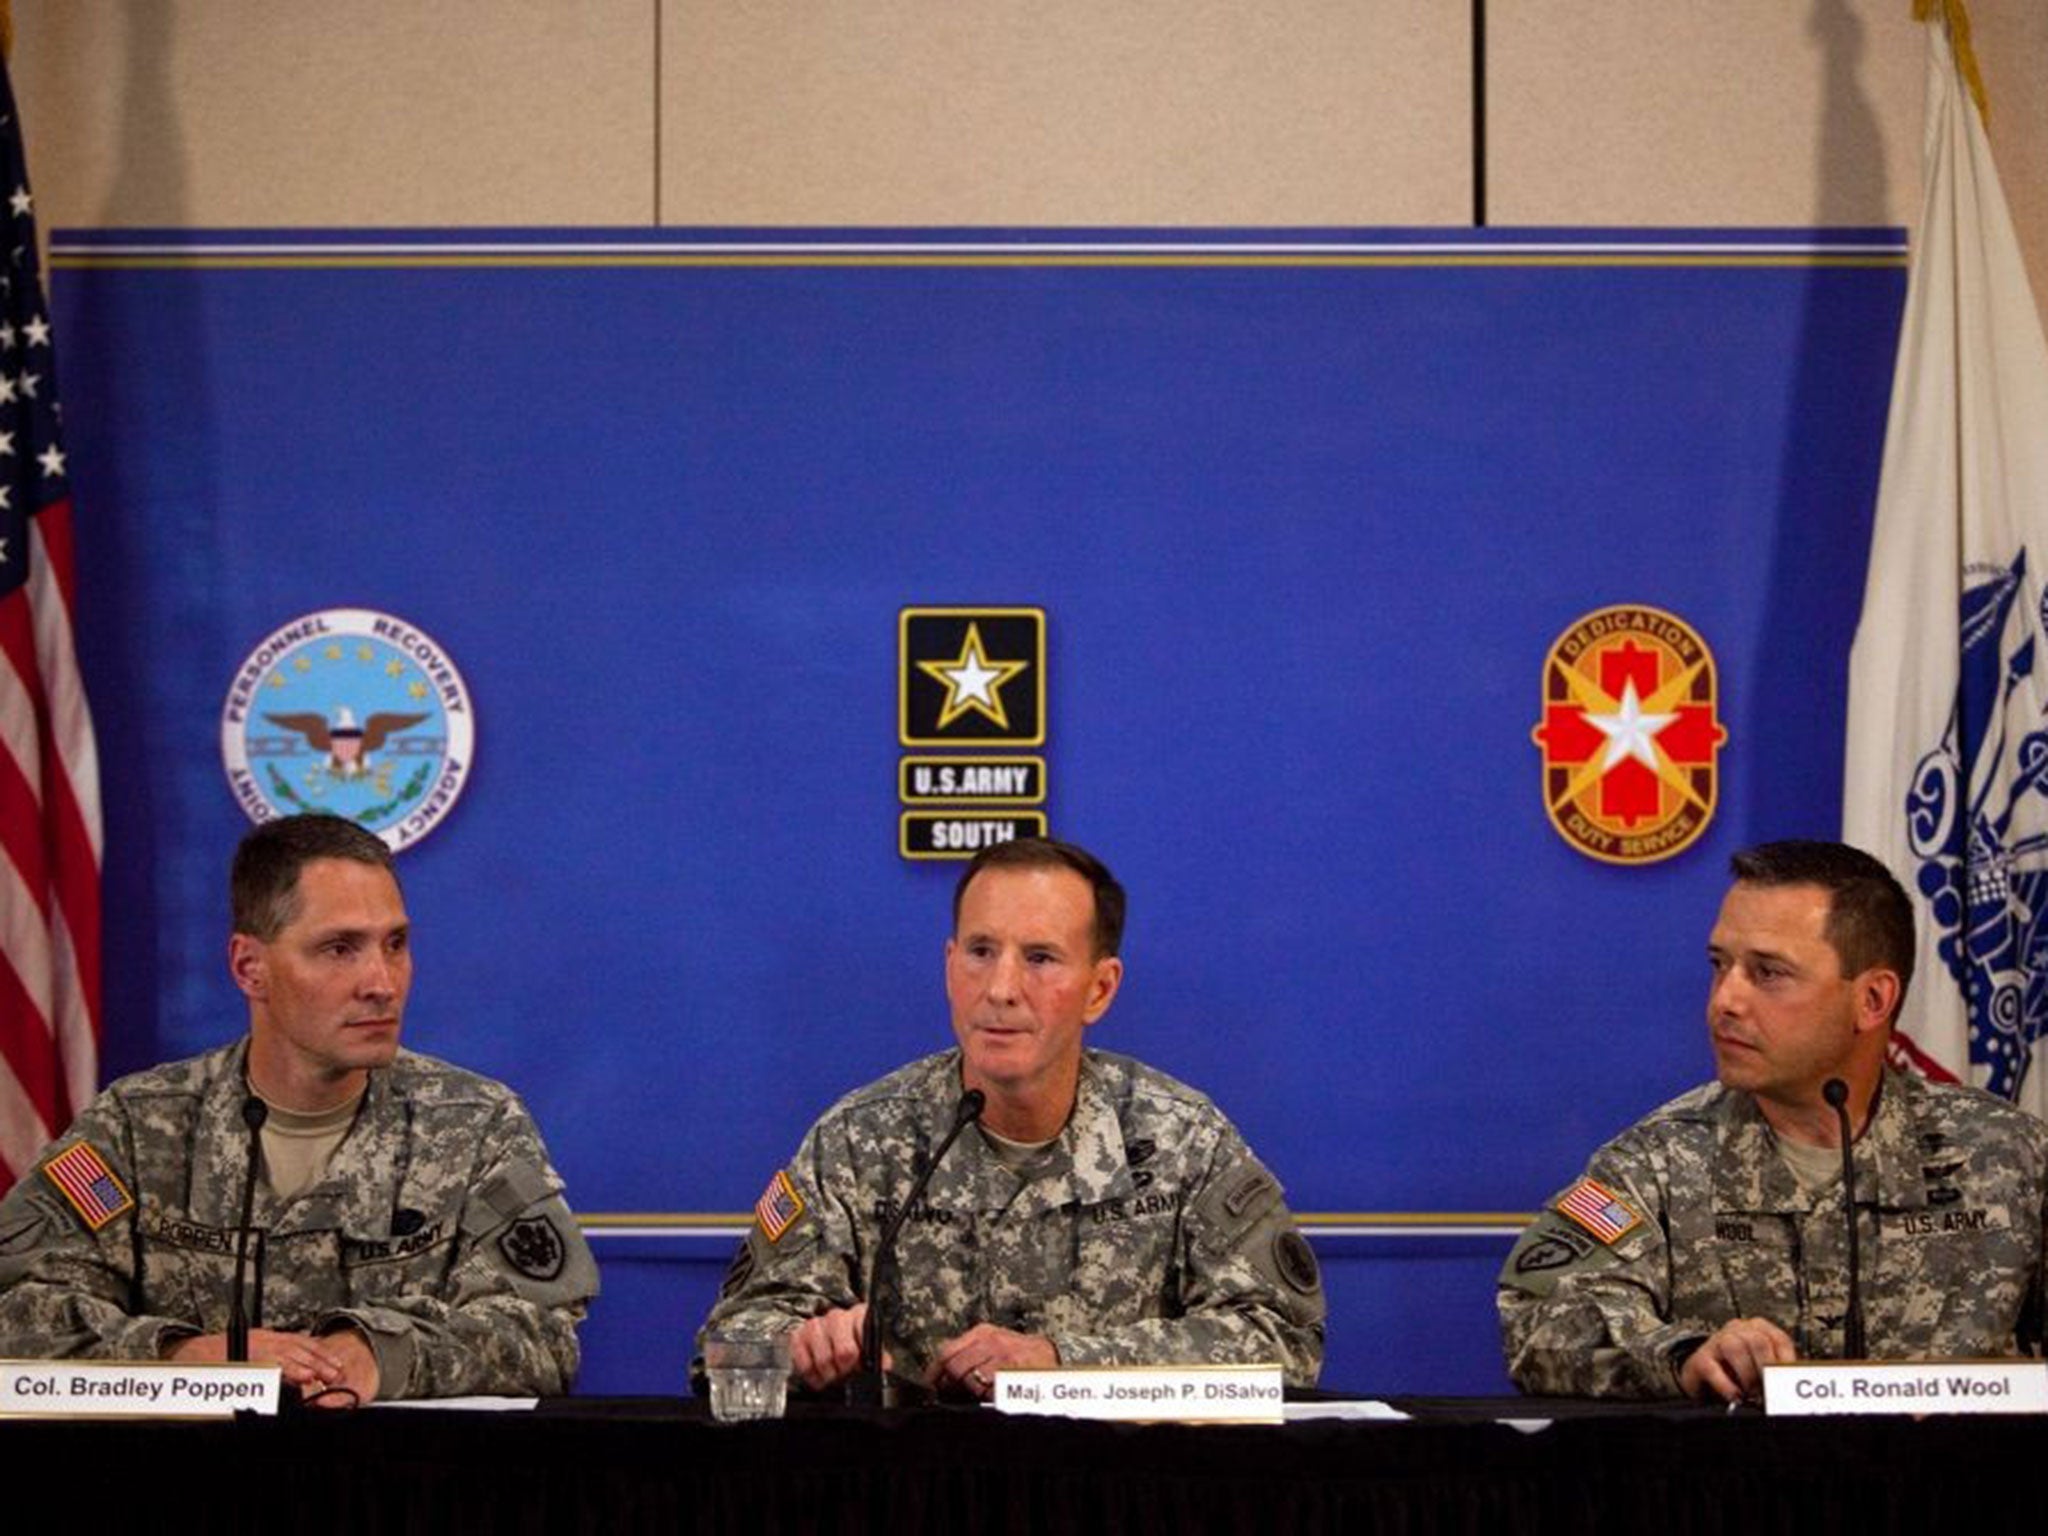 Colonel Bradley J. Kamrowski, Ph.D., Major General Joseph P. DiSalvo, and Colonel Ronald N. Wool deliver a press conference at the Fort Sam Houston Golf Course July 13, 2014 in San Antonio, Texas. They are reporting on Sgt. Bowe Bergdahl, his return to t